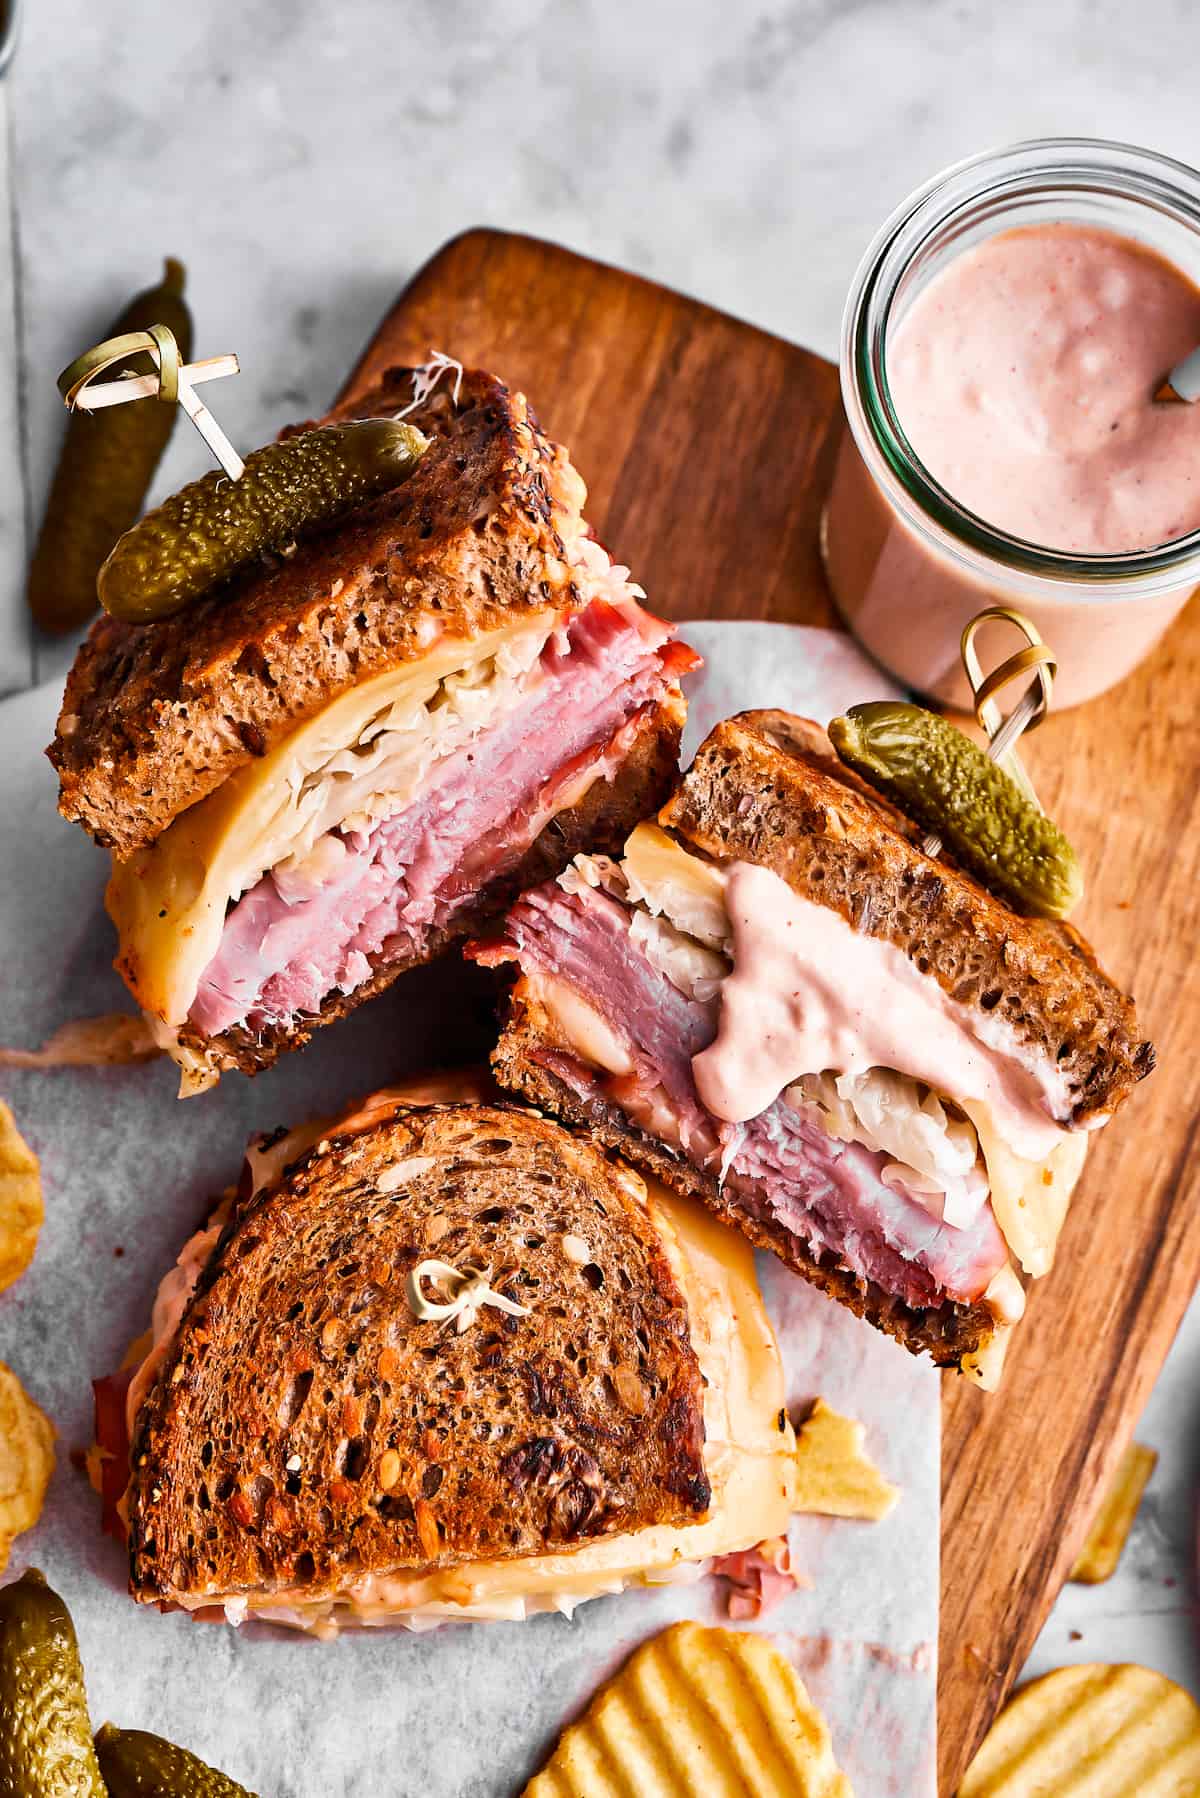 Three Reuben sandwich halves, some potato chips, and a jar of dressing on a cutting board.